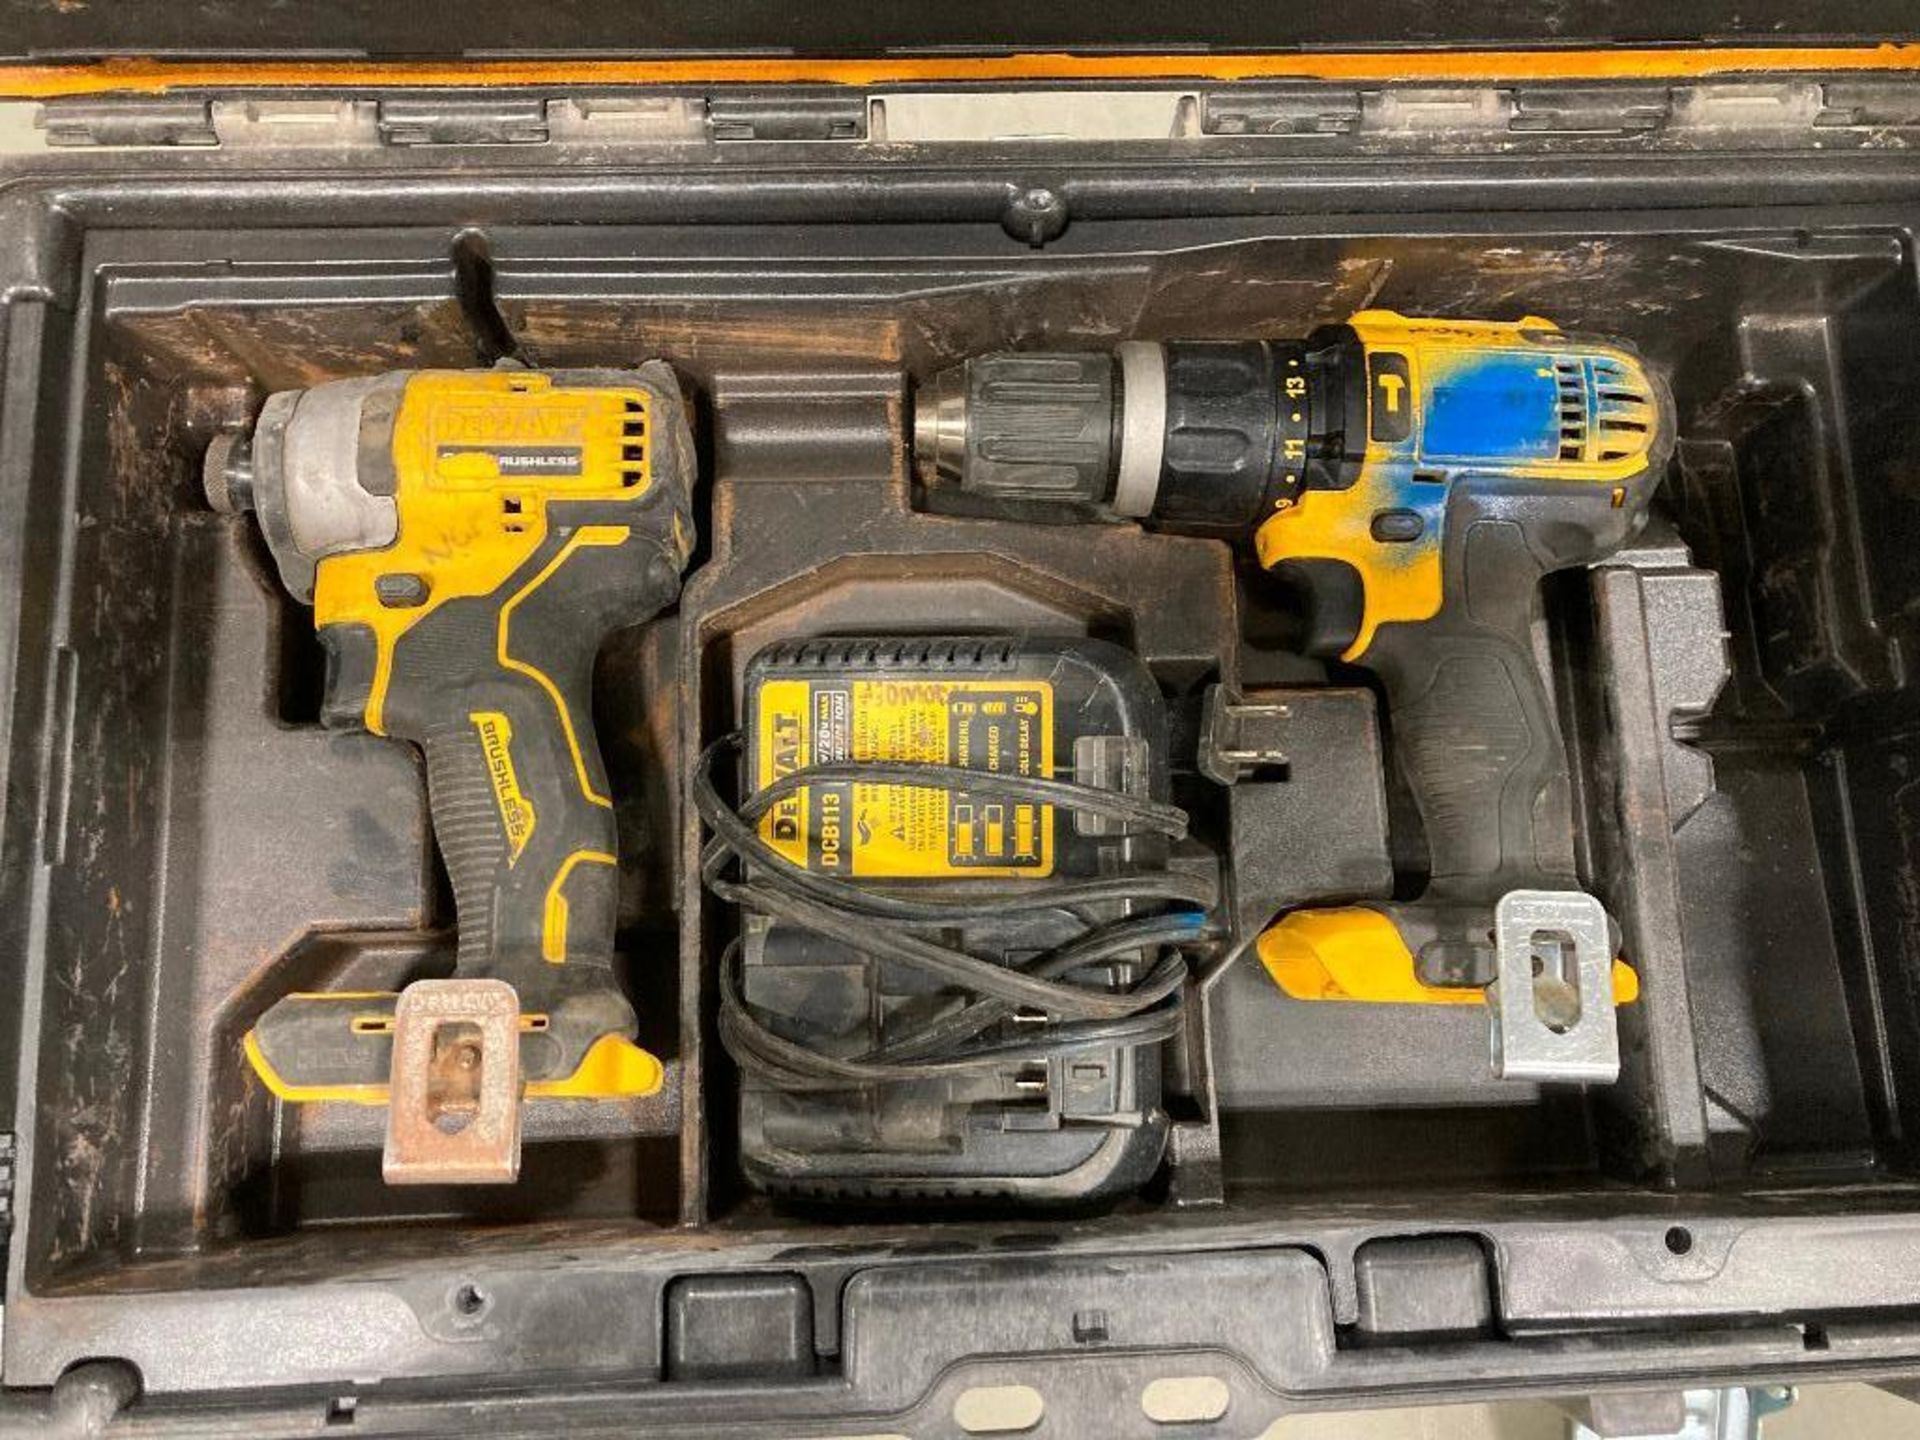 DeWalt Toolbox Including: (1) 1/2" Hammer Drill, (1) 1/4" Impact Drill and (1) Battery Charger - Image 3 of 7